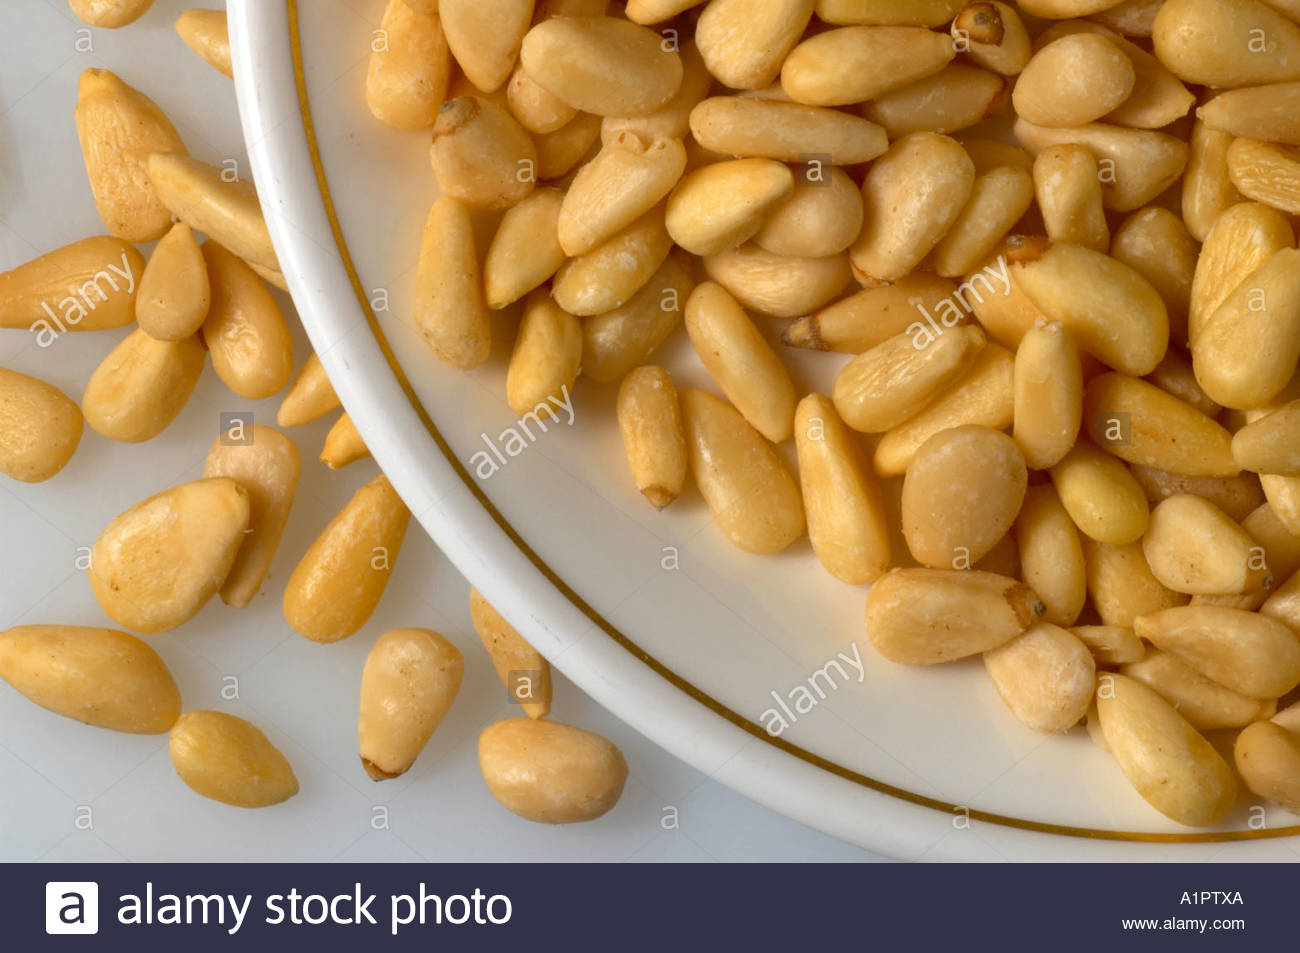 A number of pine nuts on a dish Stock Photo